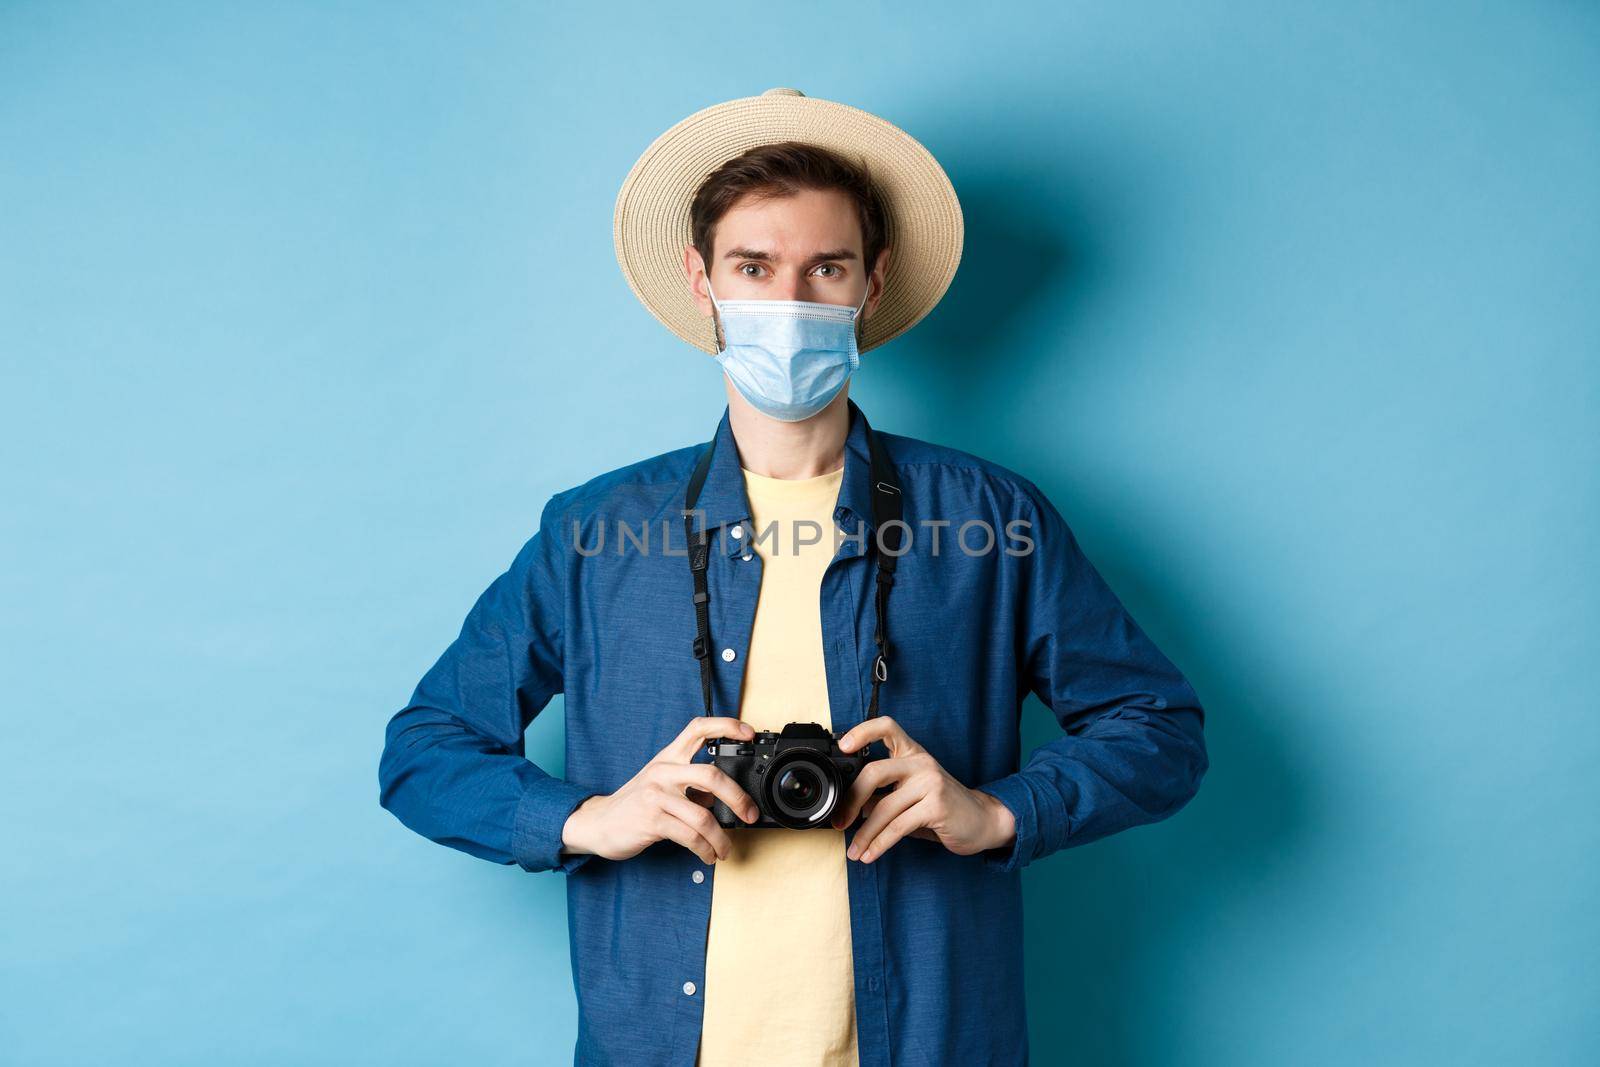 Covid-19, pandemic and travel concept. Young guy travelling abroad with camera, taking pictures on vacation, wearing medical mask from coronavirus, blue background.